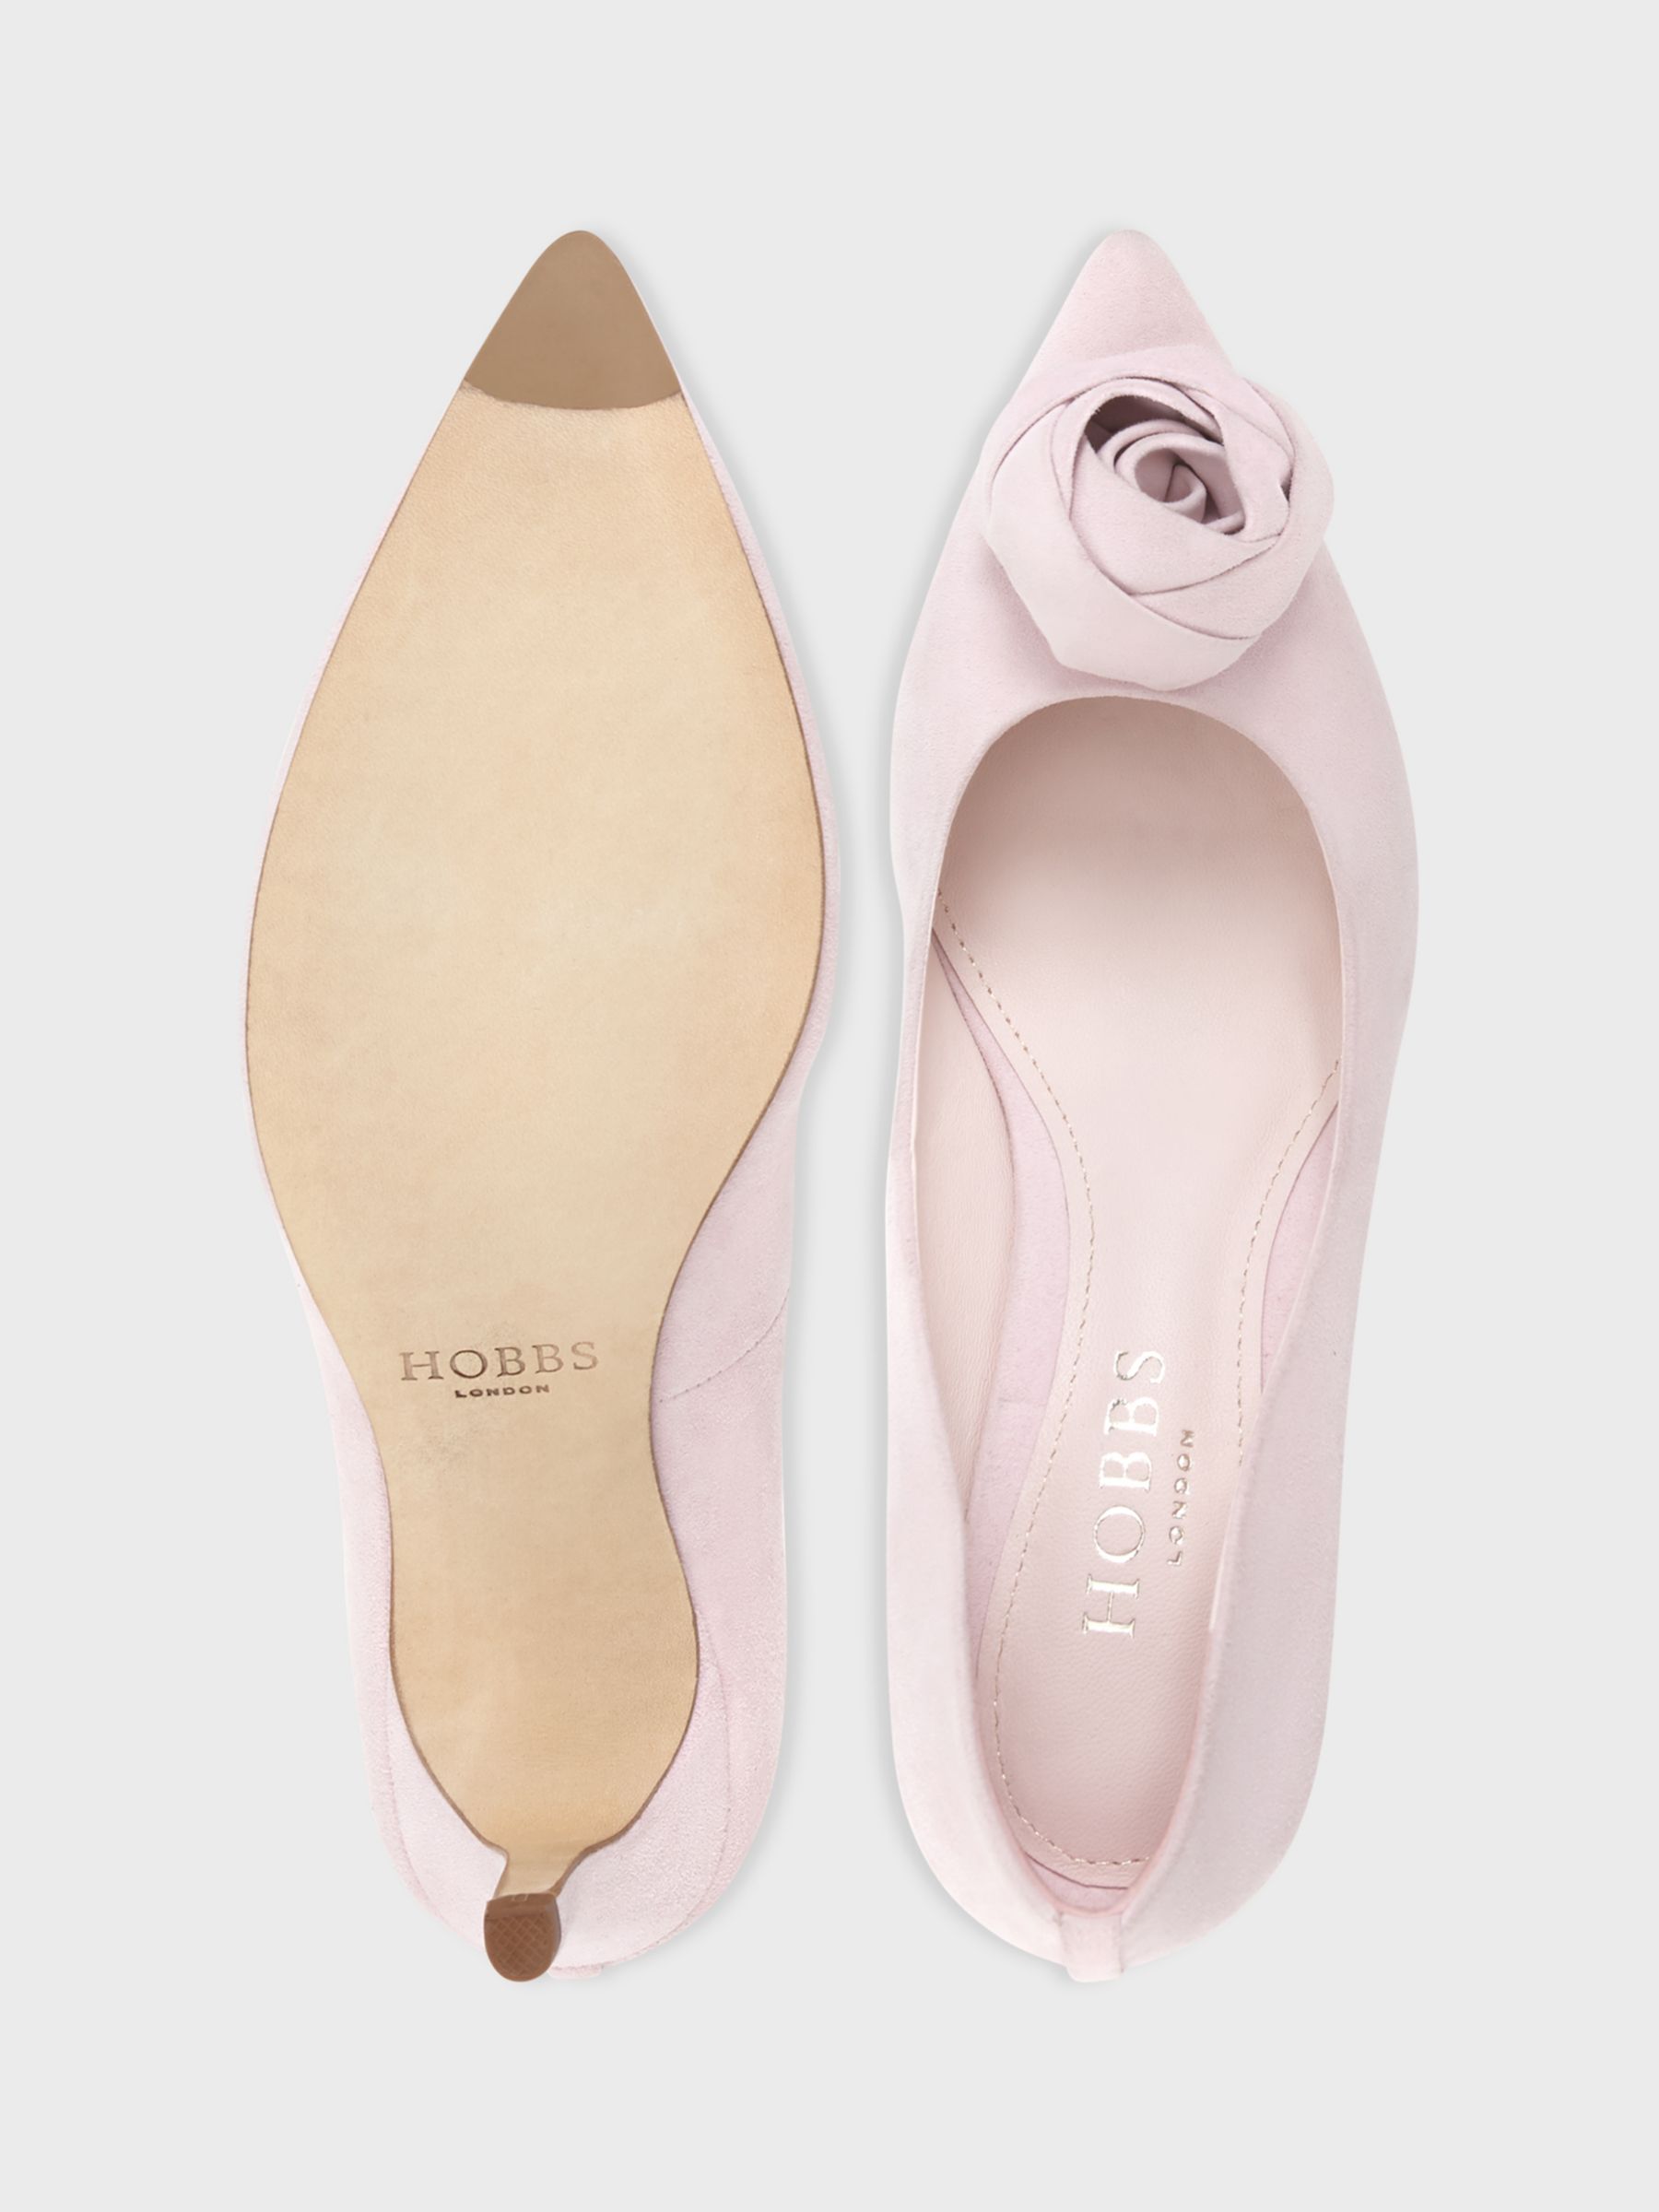 Hobbs Maisie Suede Court Shoes, Pale Pink, 4